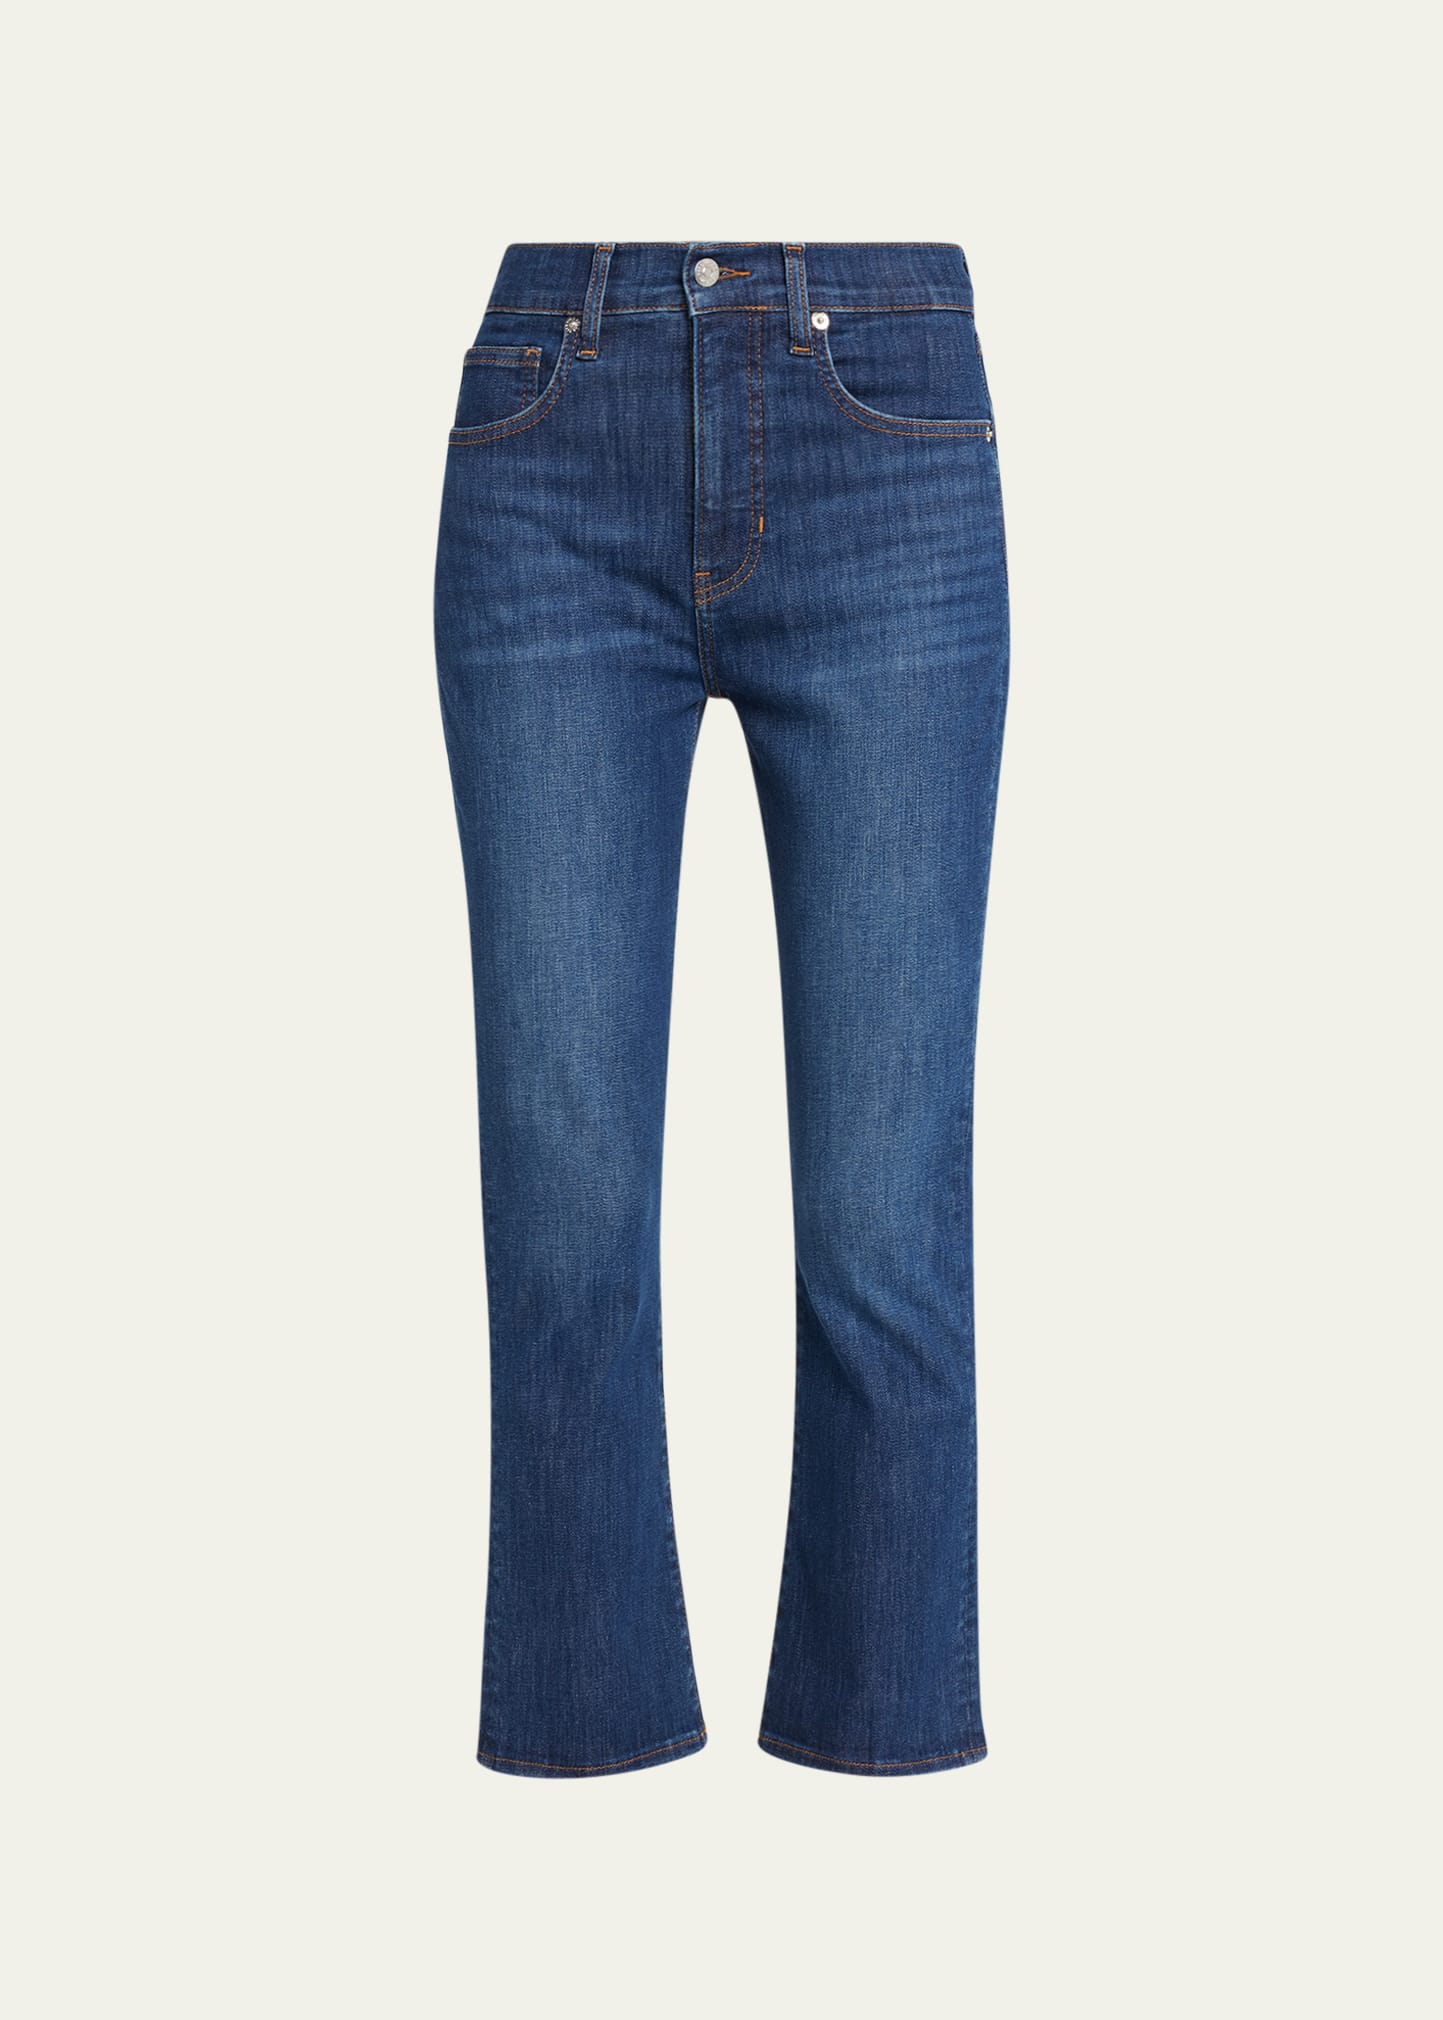 Veronica Beard Jeans Carly Kick Flare Ankle Jeans In Bright Blue